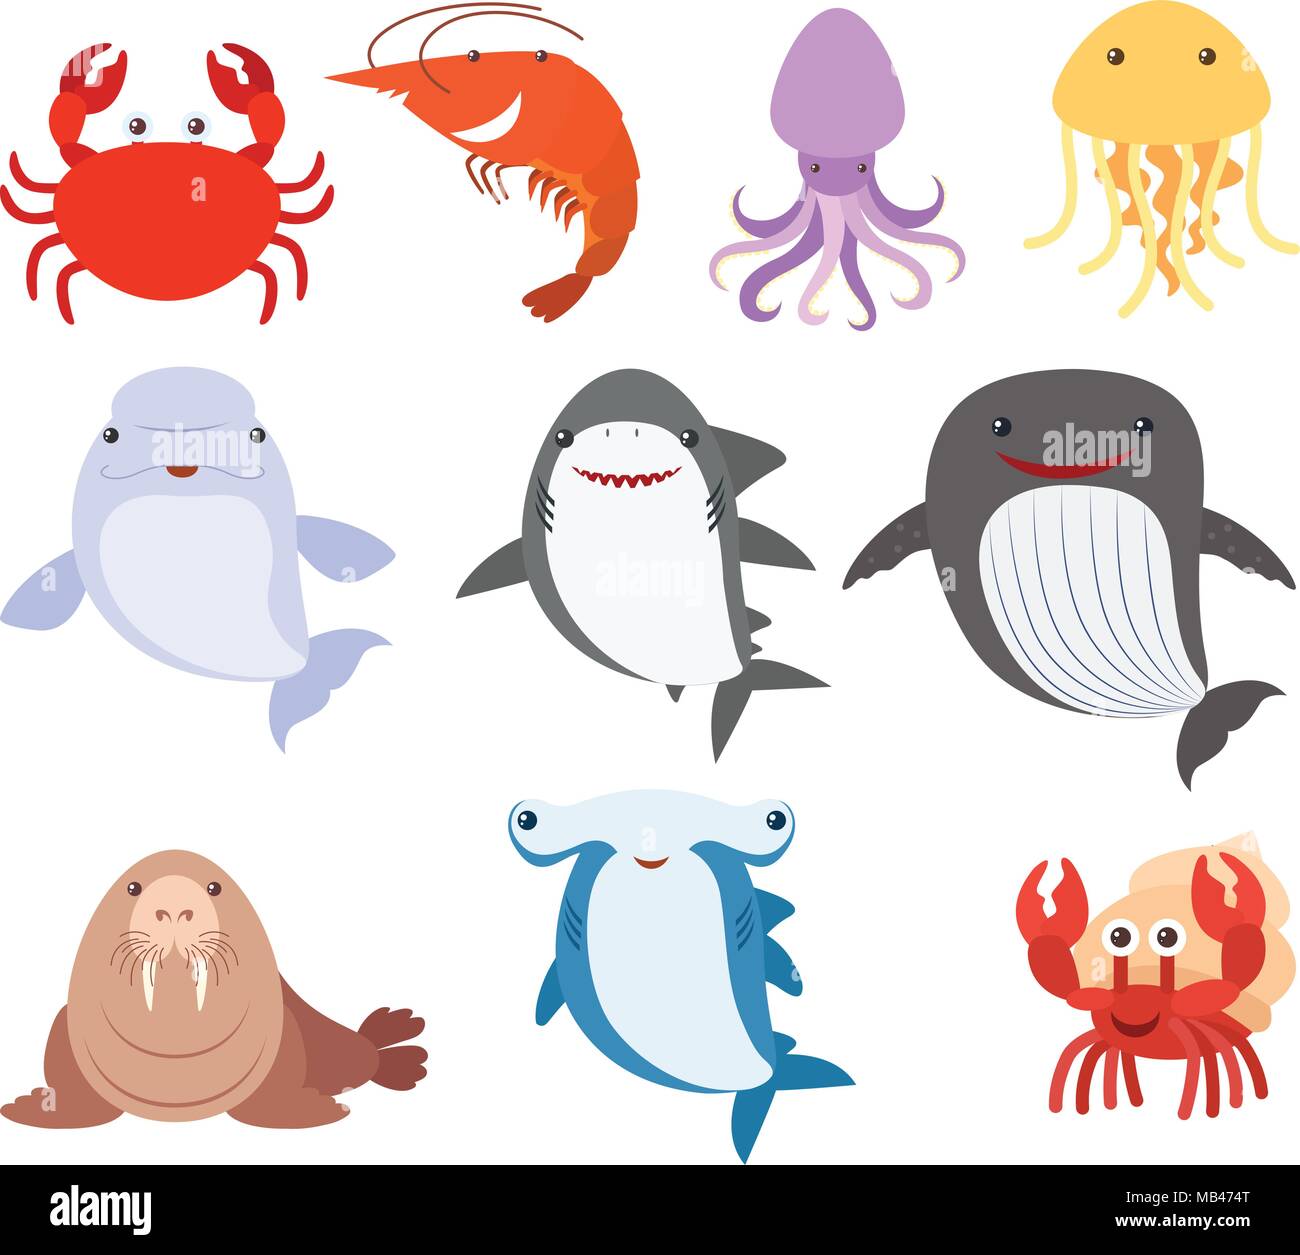 Many types of sea creatures illustration Stock Vector